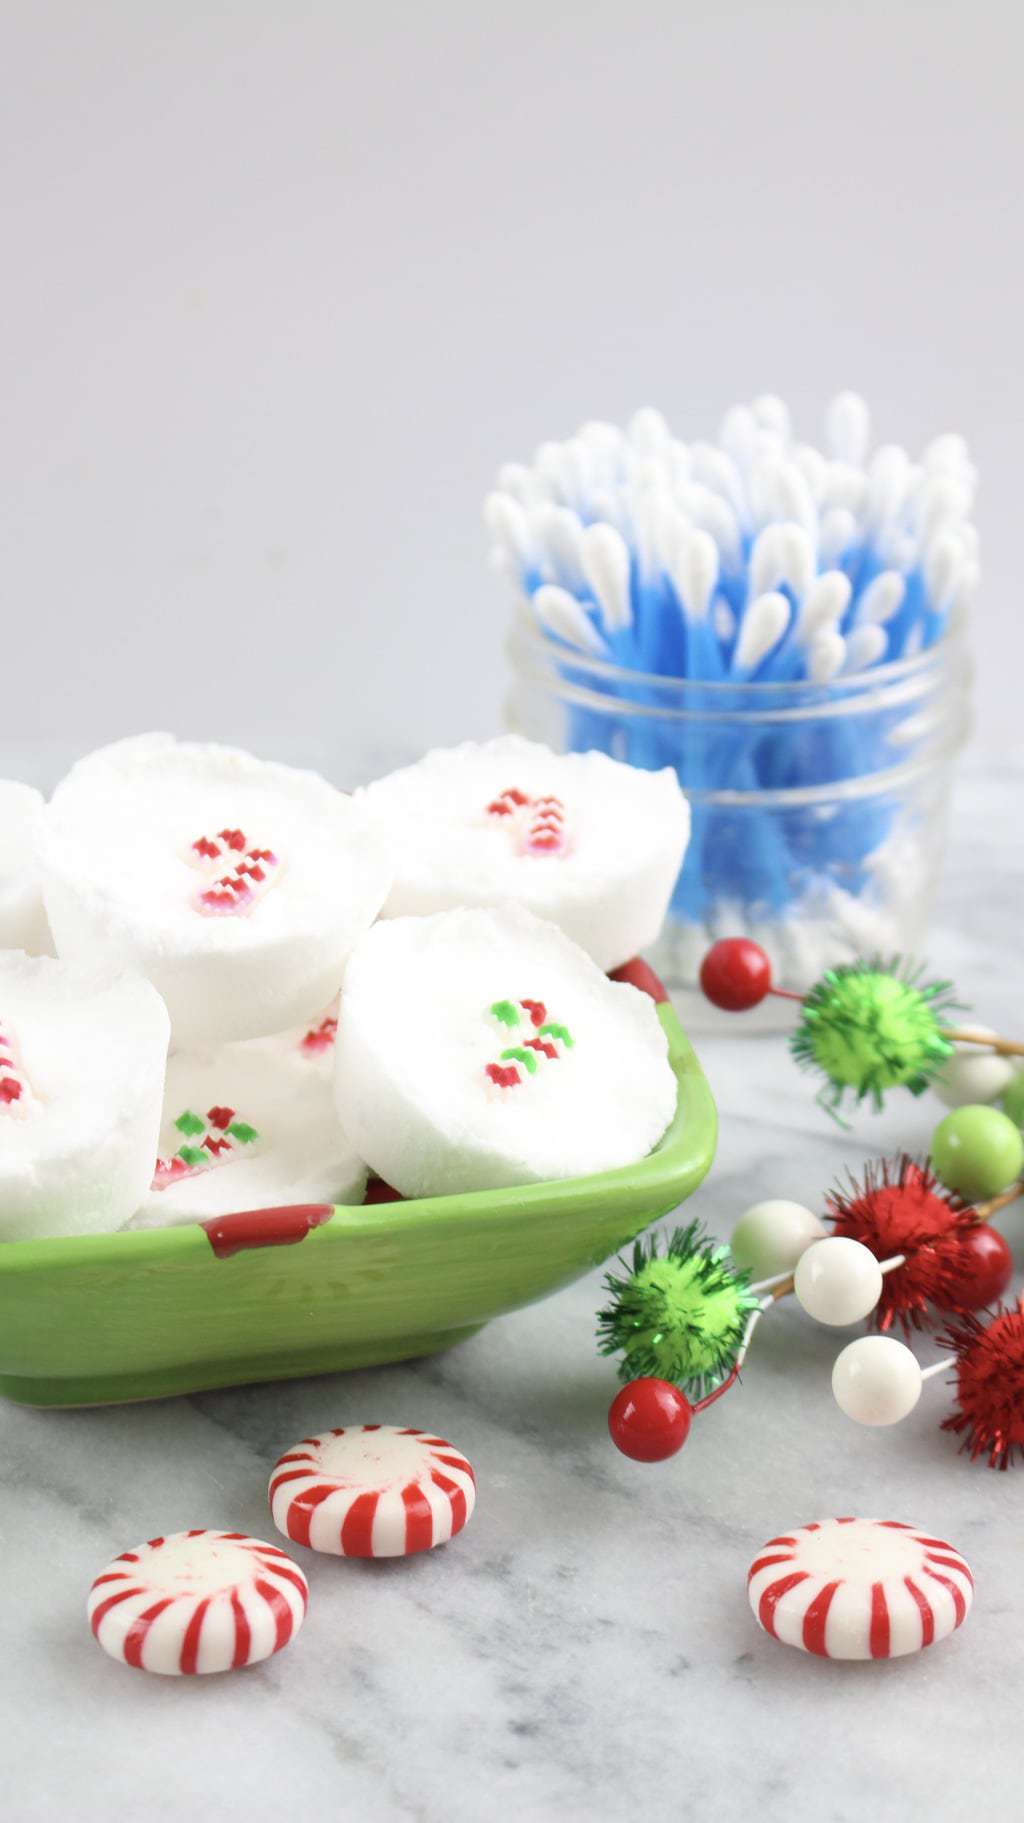 aromatherapy-shower-steamers-peppermint-1